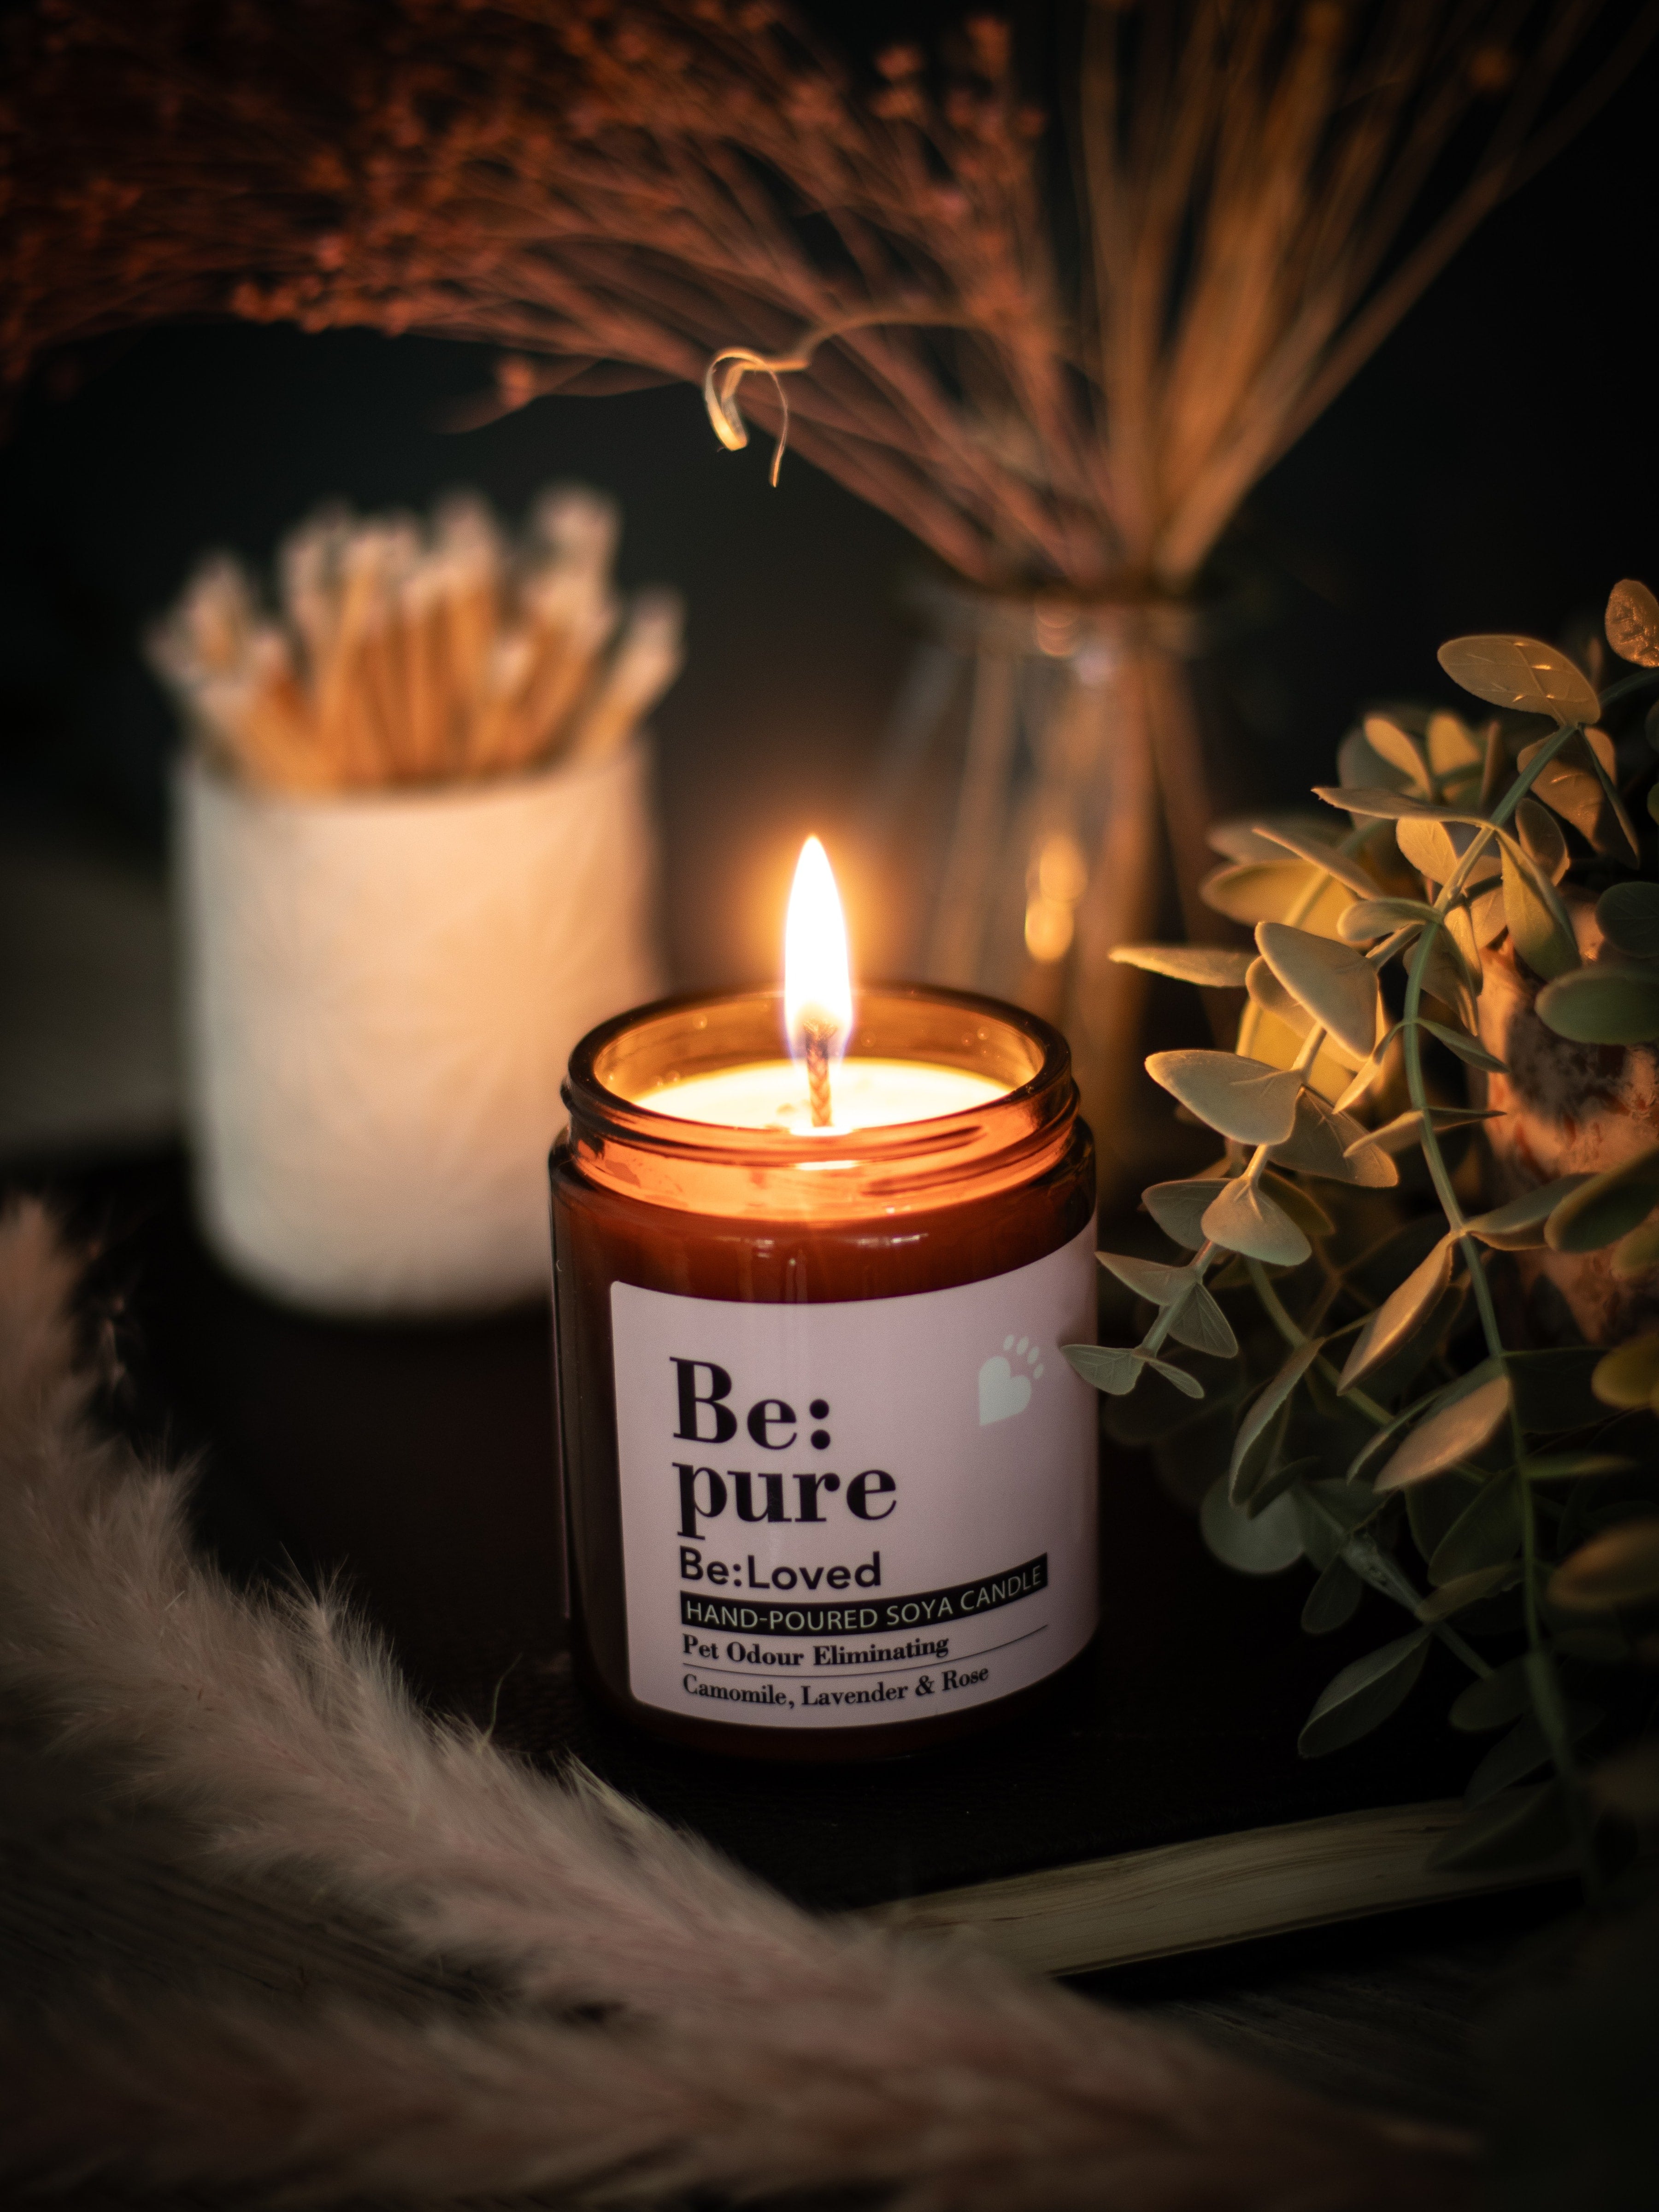 Be:Pure candle burning with bright flame